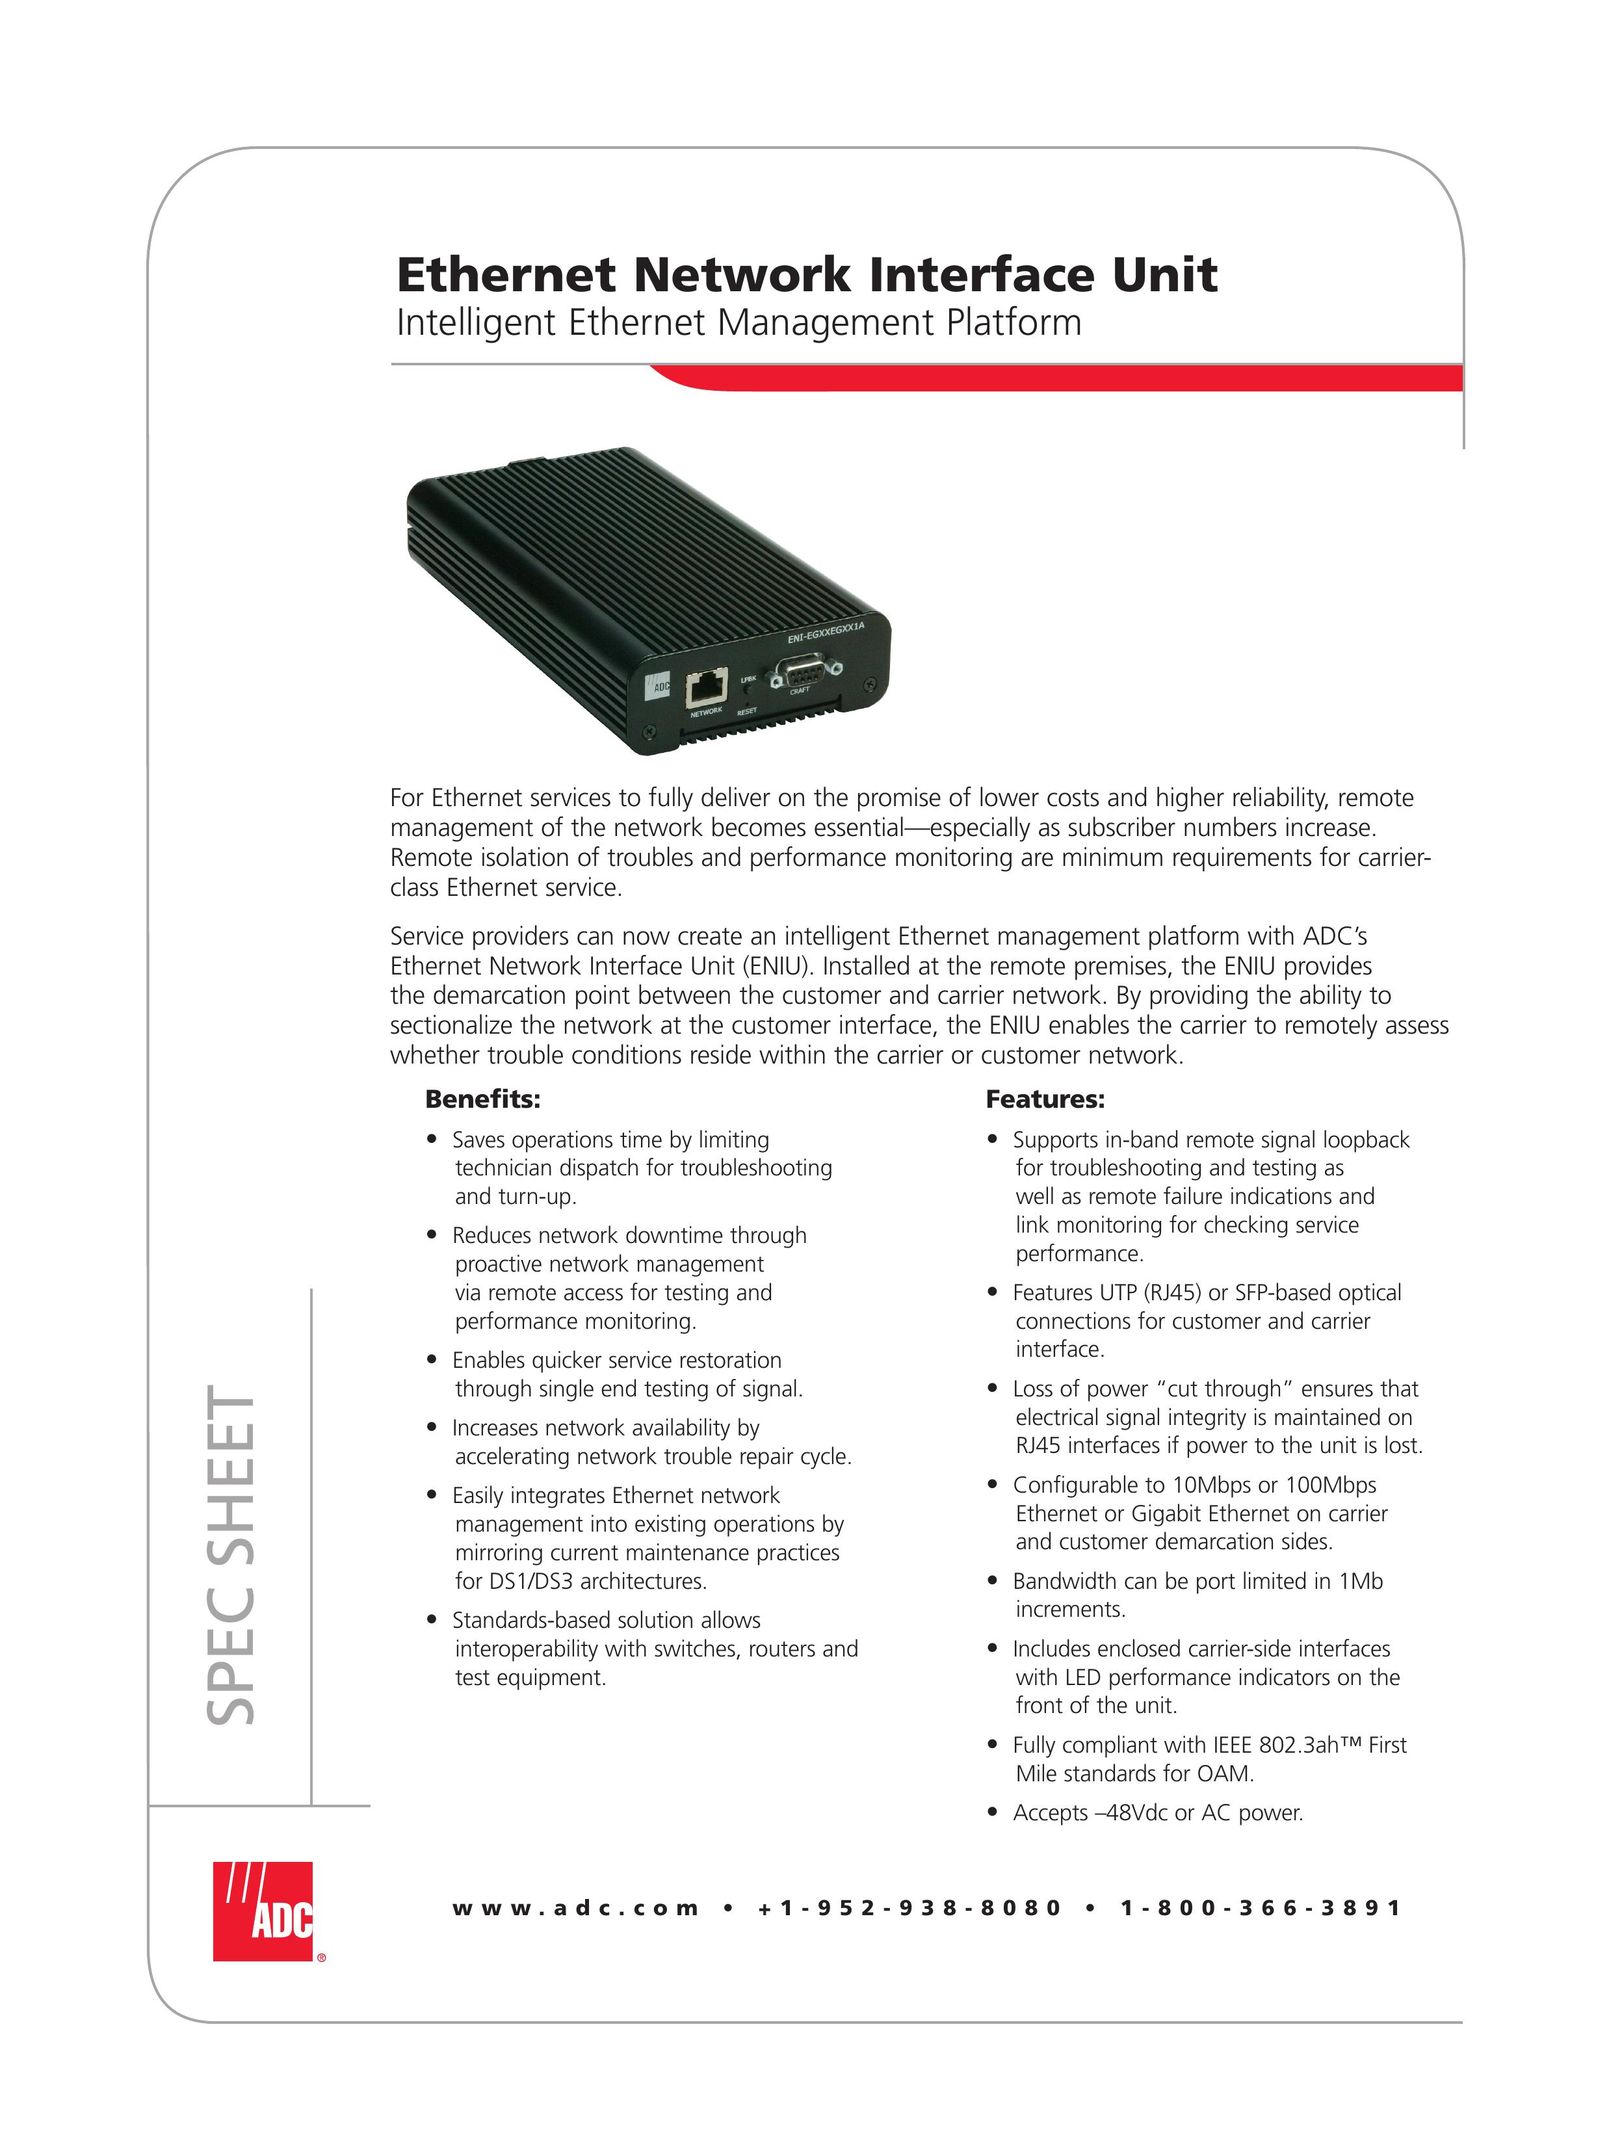 ADC Ethernet Network Interface Unit Network Card User Manual